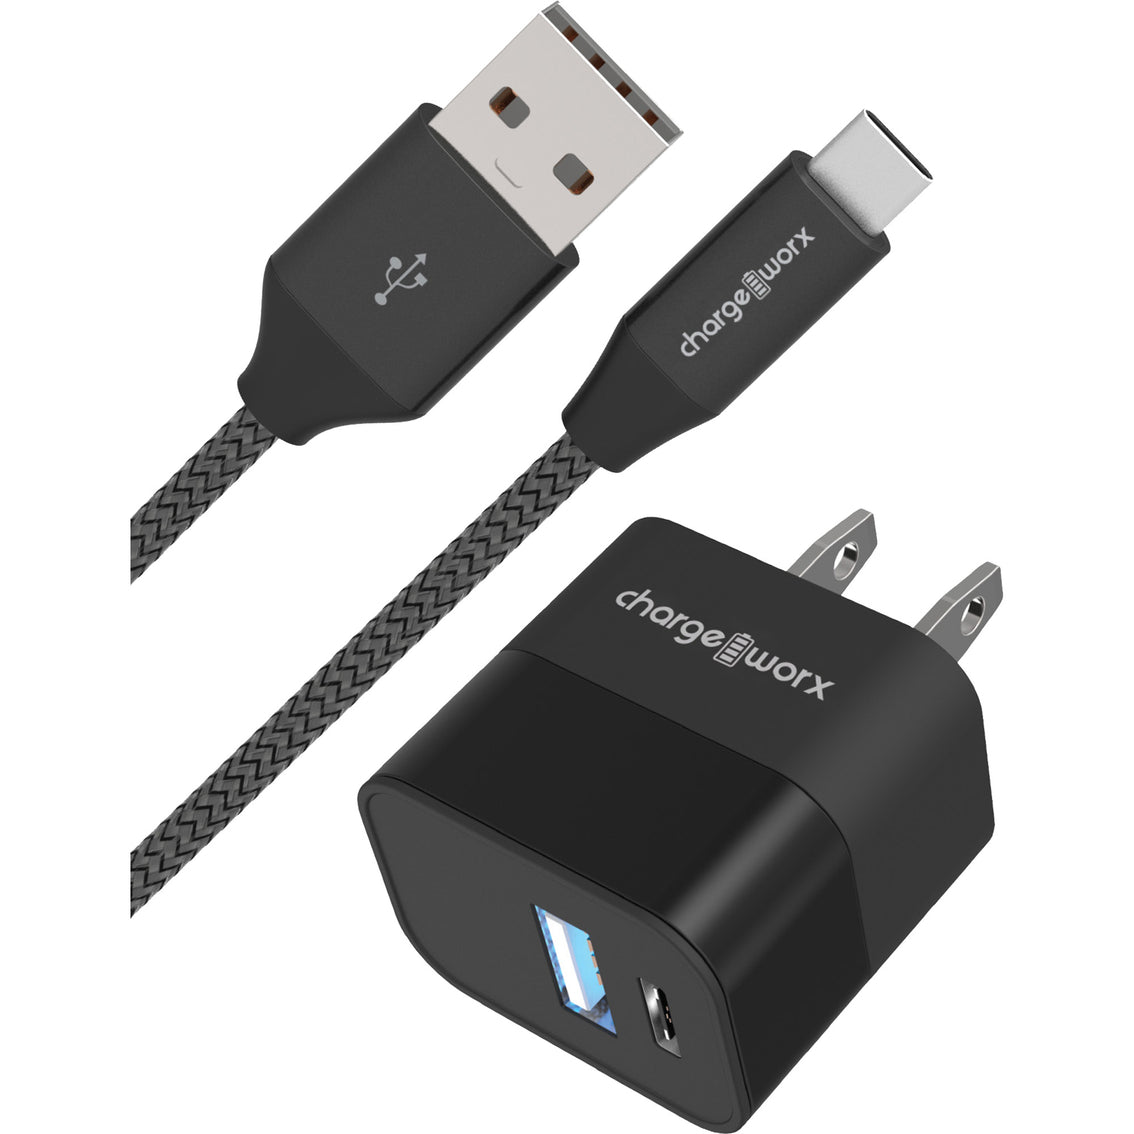 Chargeworx Dual USB Charger & 6ft USB-A to USB-C Cable